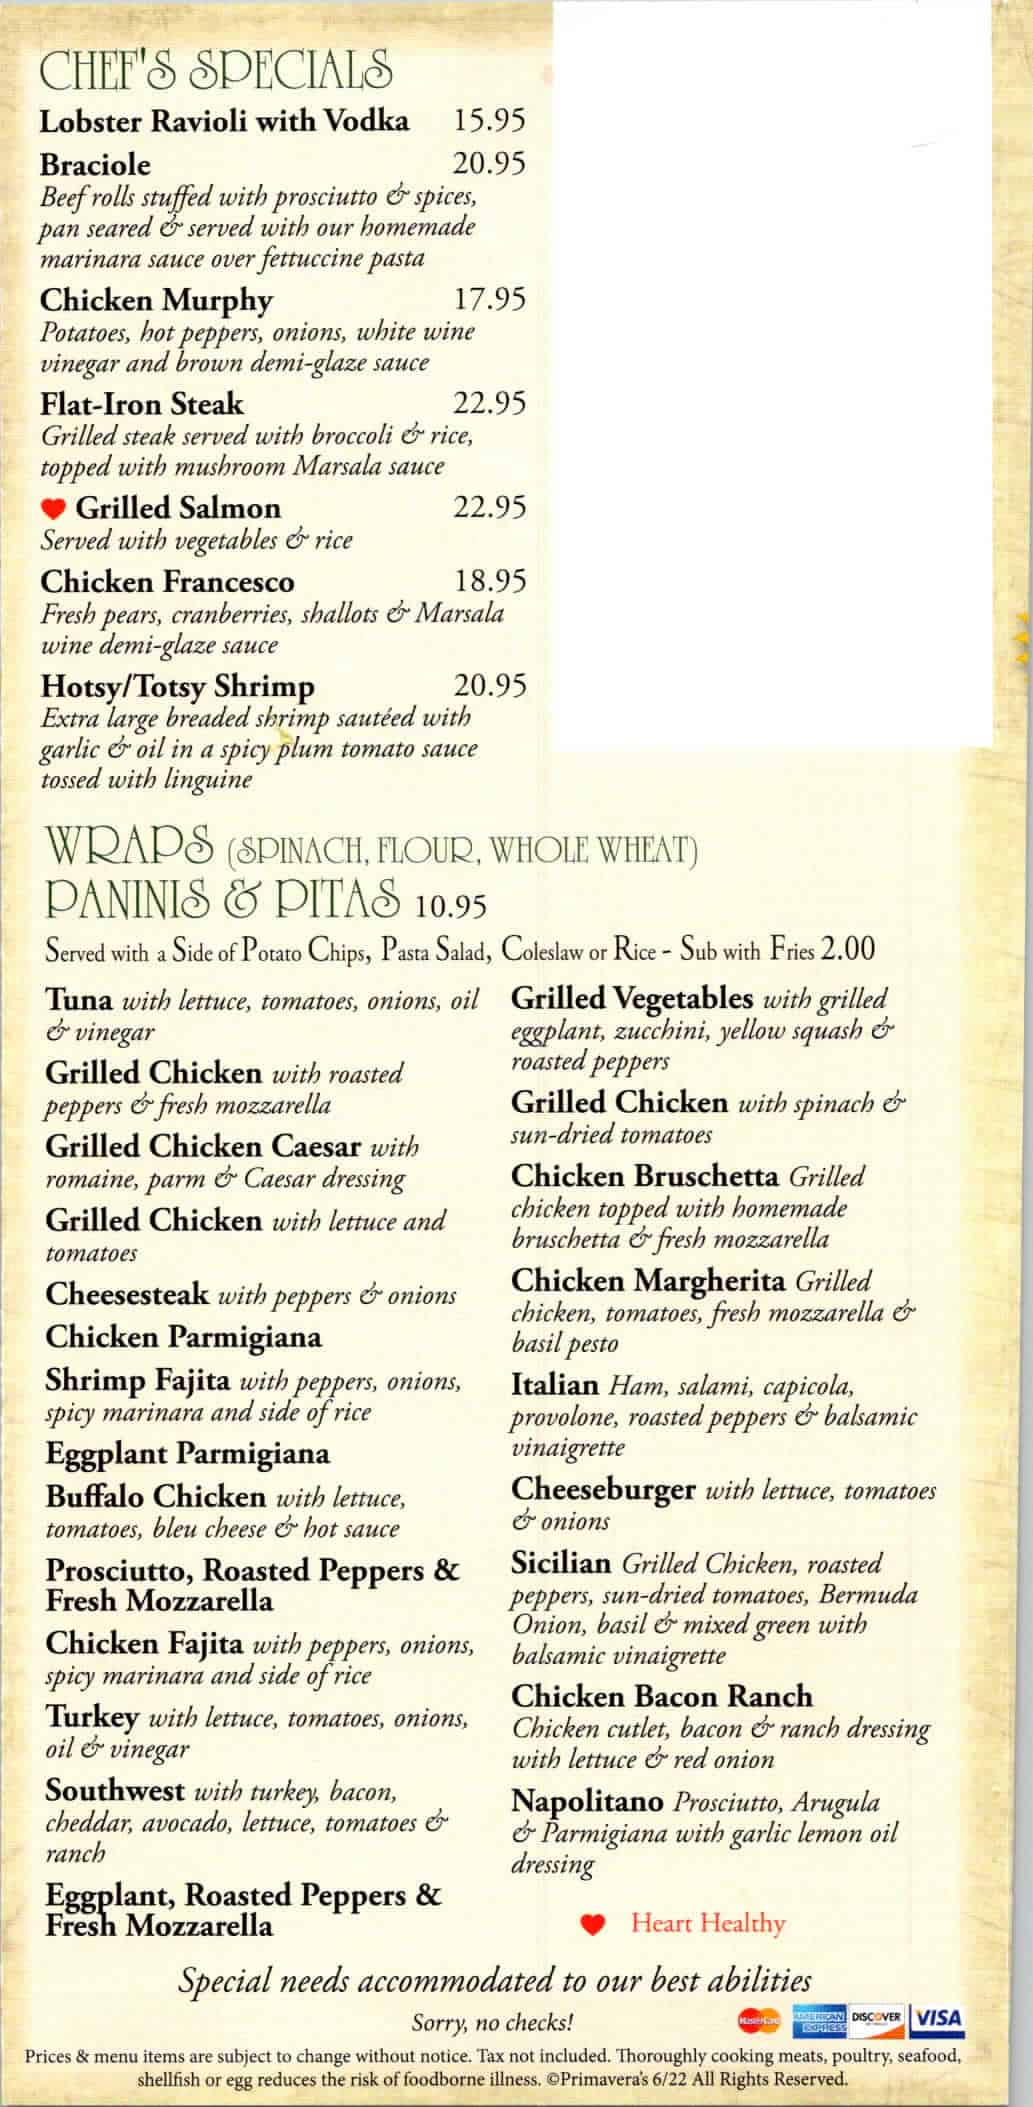 A menu for a restaurant with a lot of items on it.